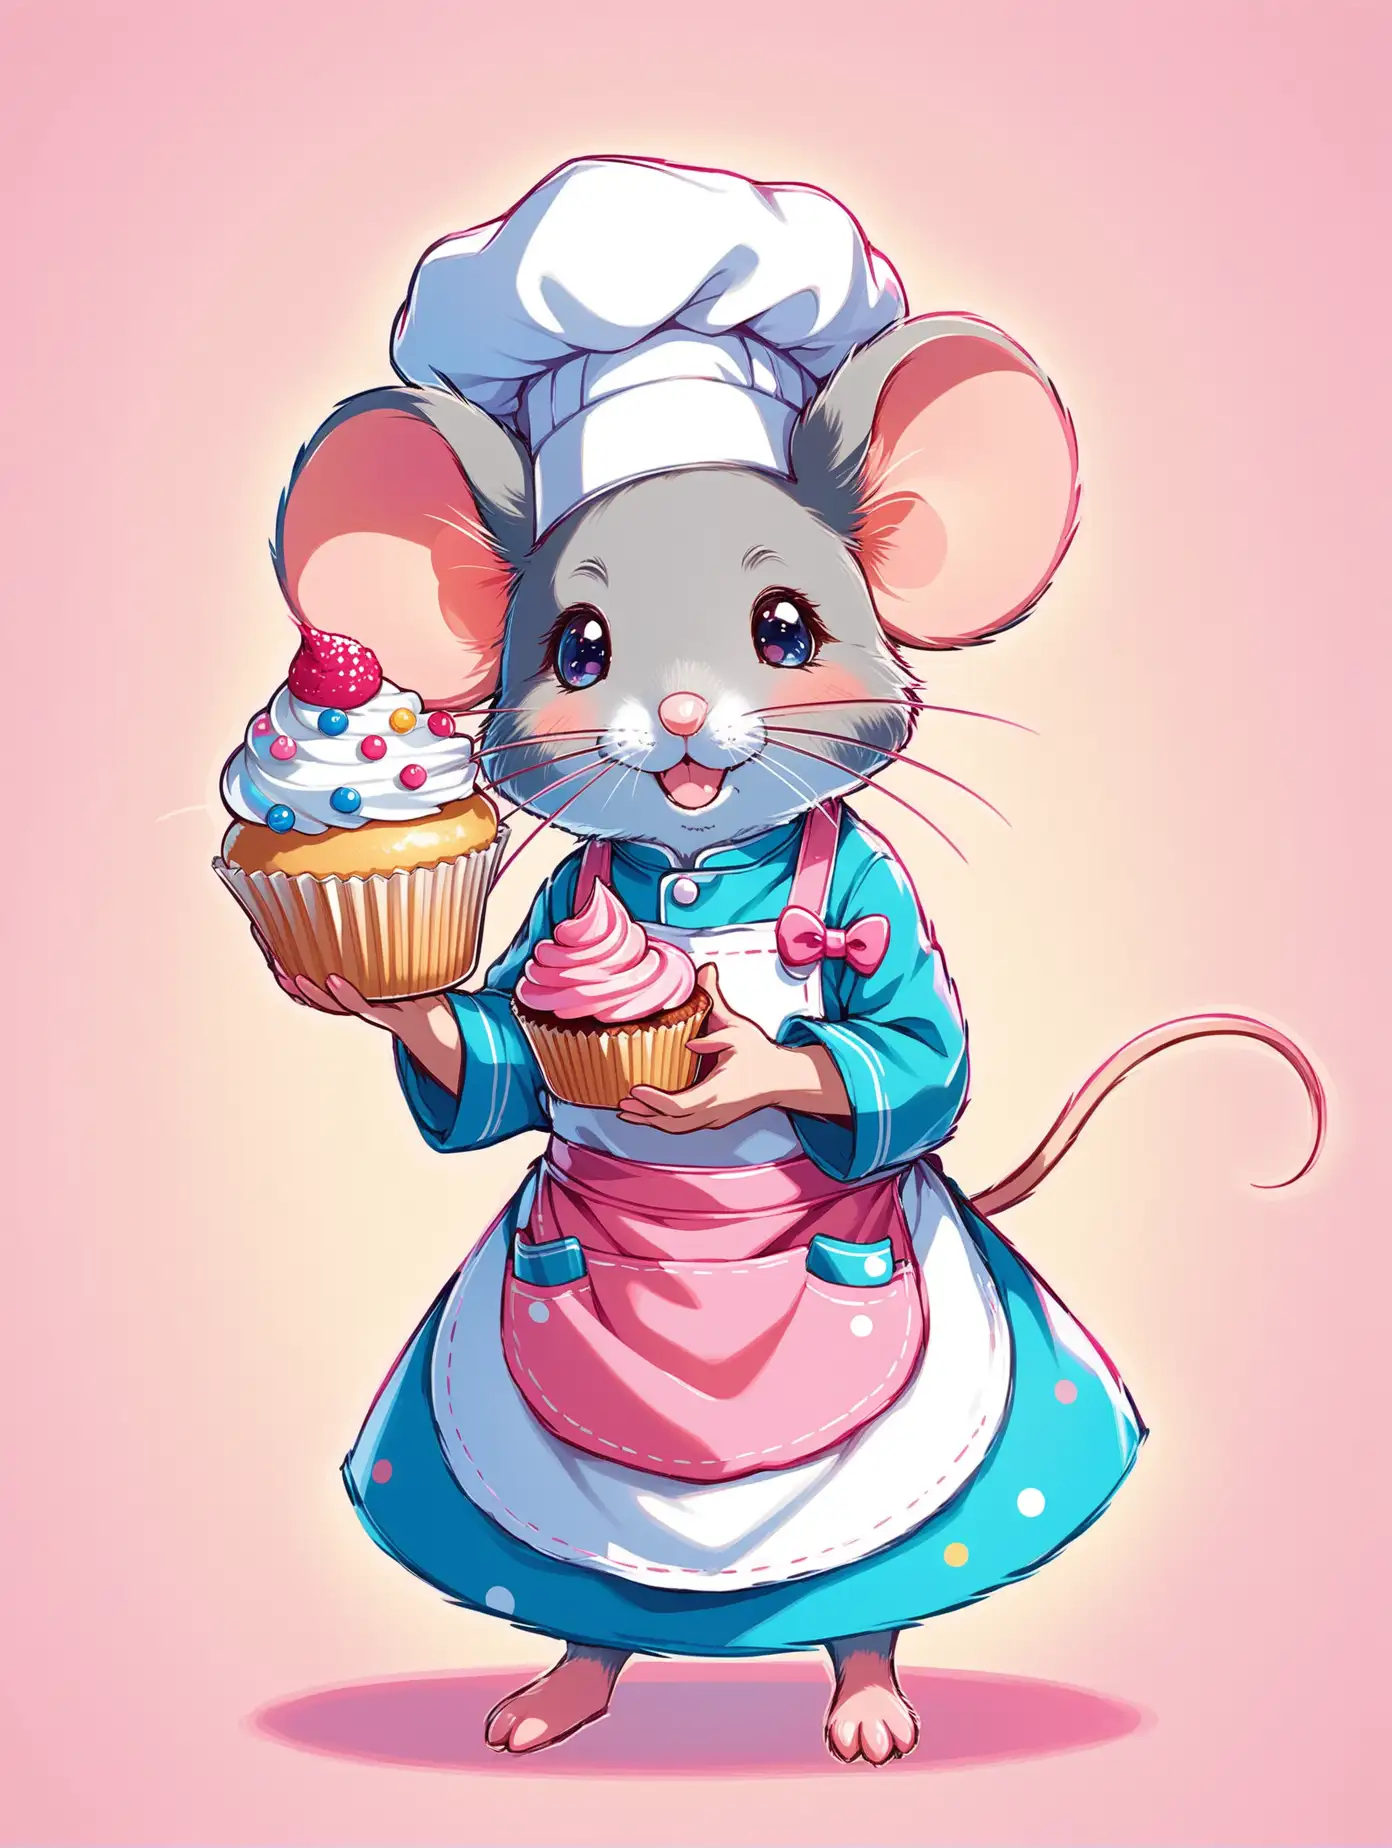 Adorable Mouse Chef with Cupcake Sweet Culinary Delight in Pink and Blue Palette